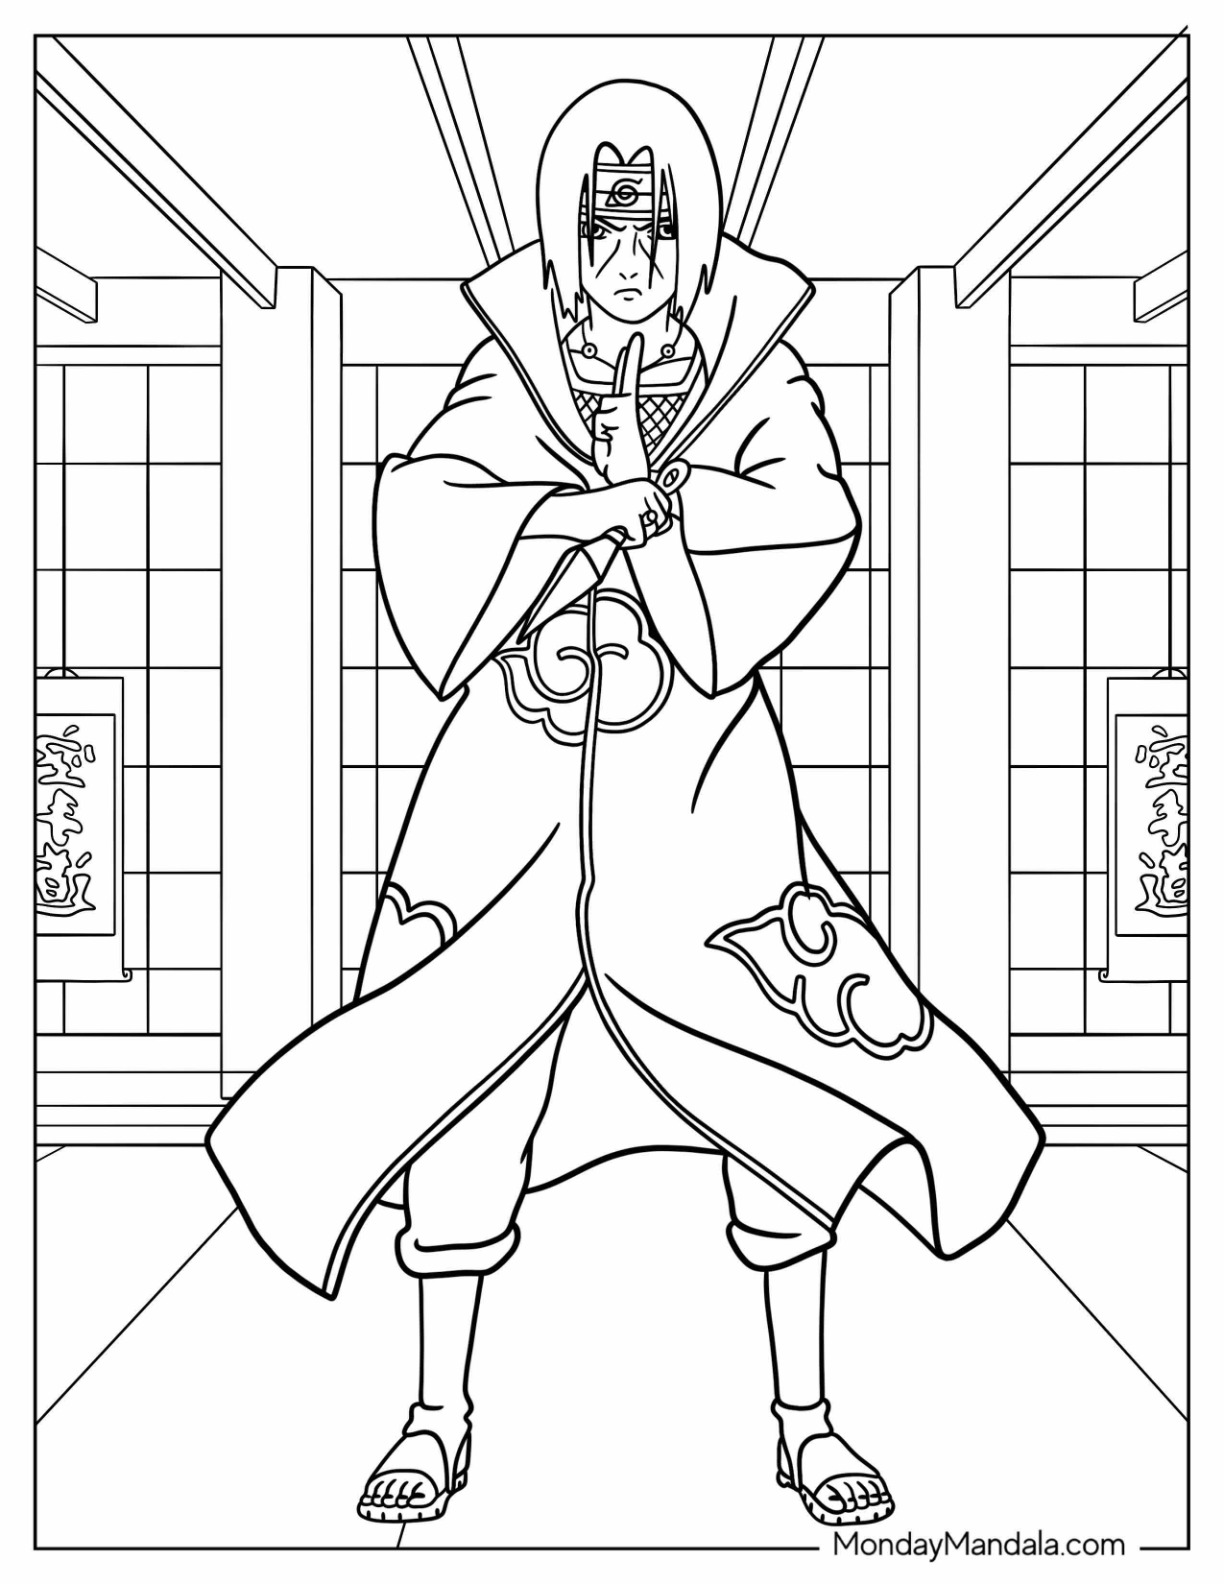 Itachi coloring pages free pdf printables